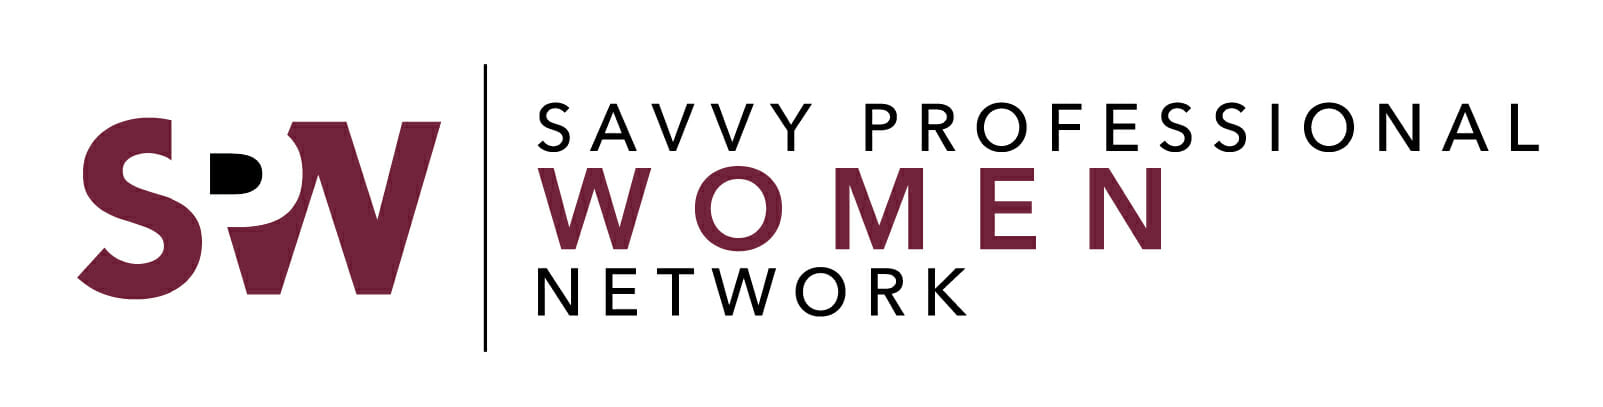 The Savvy Professional Women Network